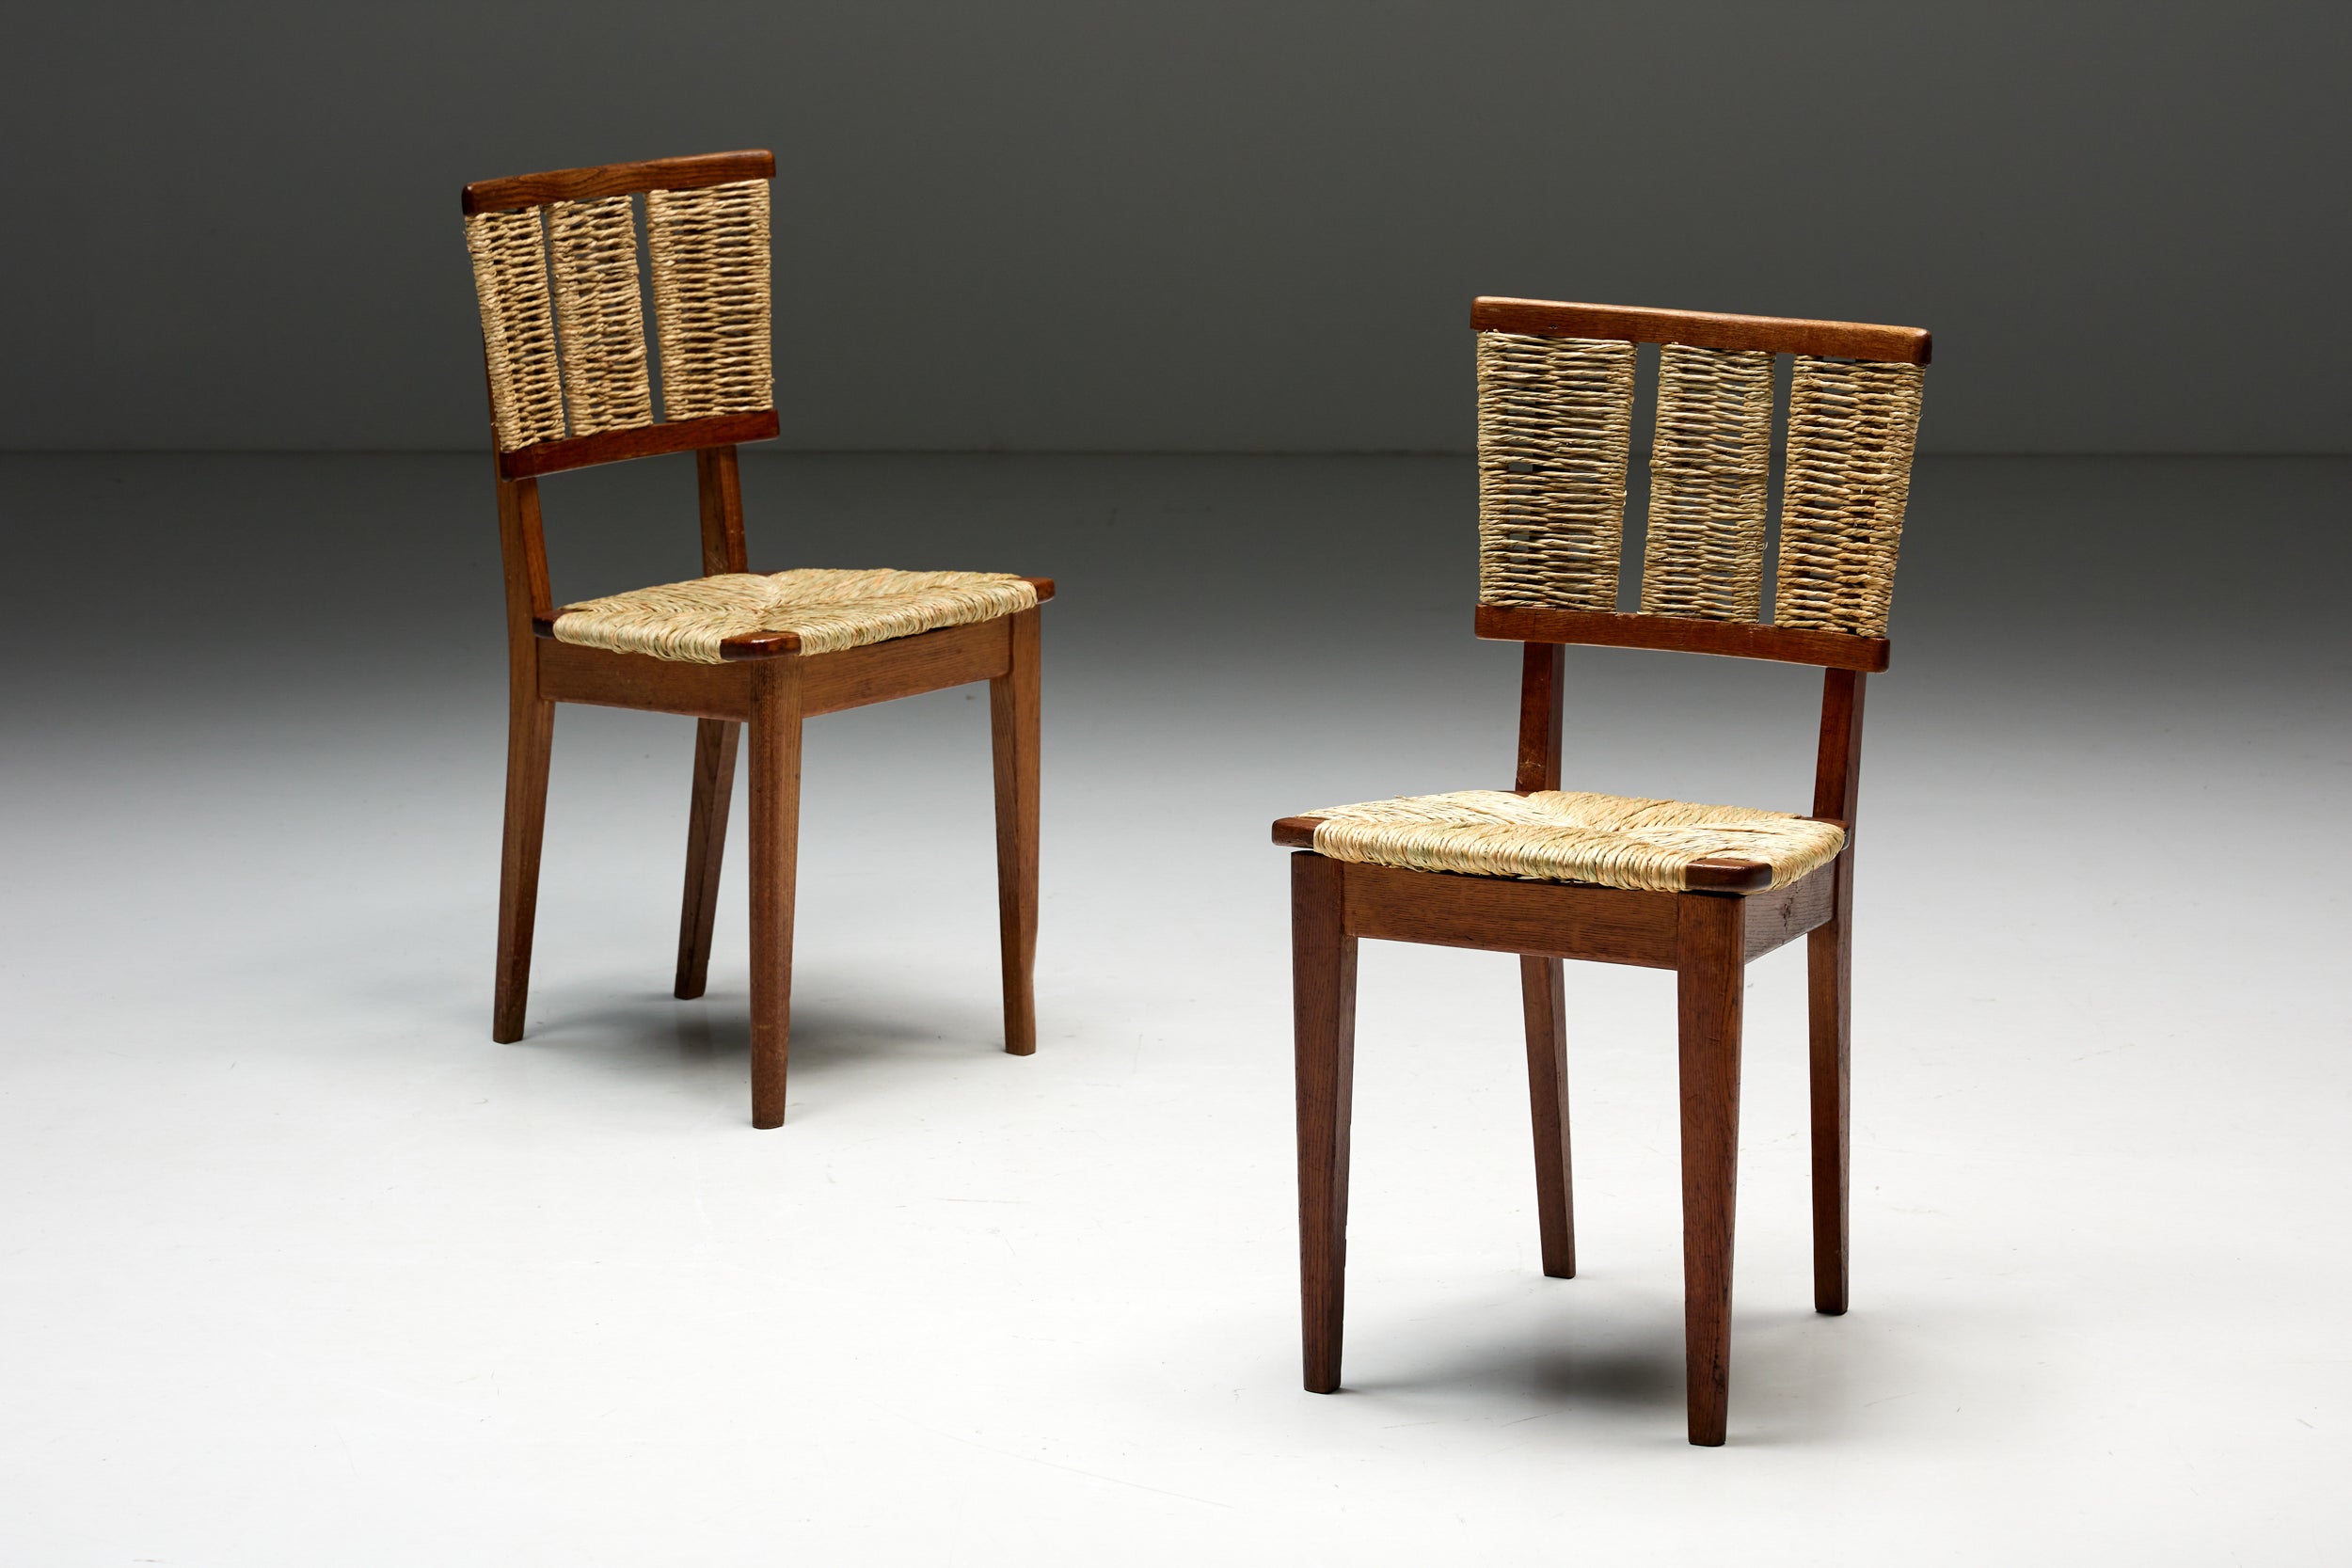 Mart Stam "A2-1" Dining Chairs in Oak and Wicker, 1940s